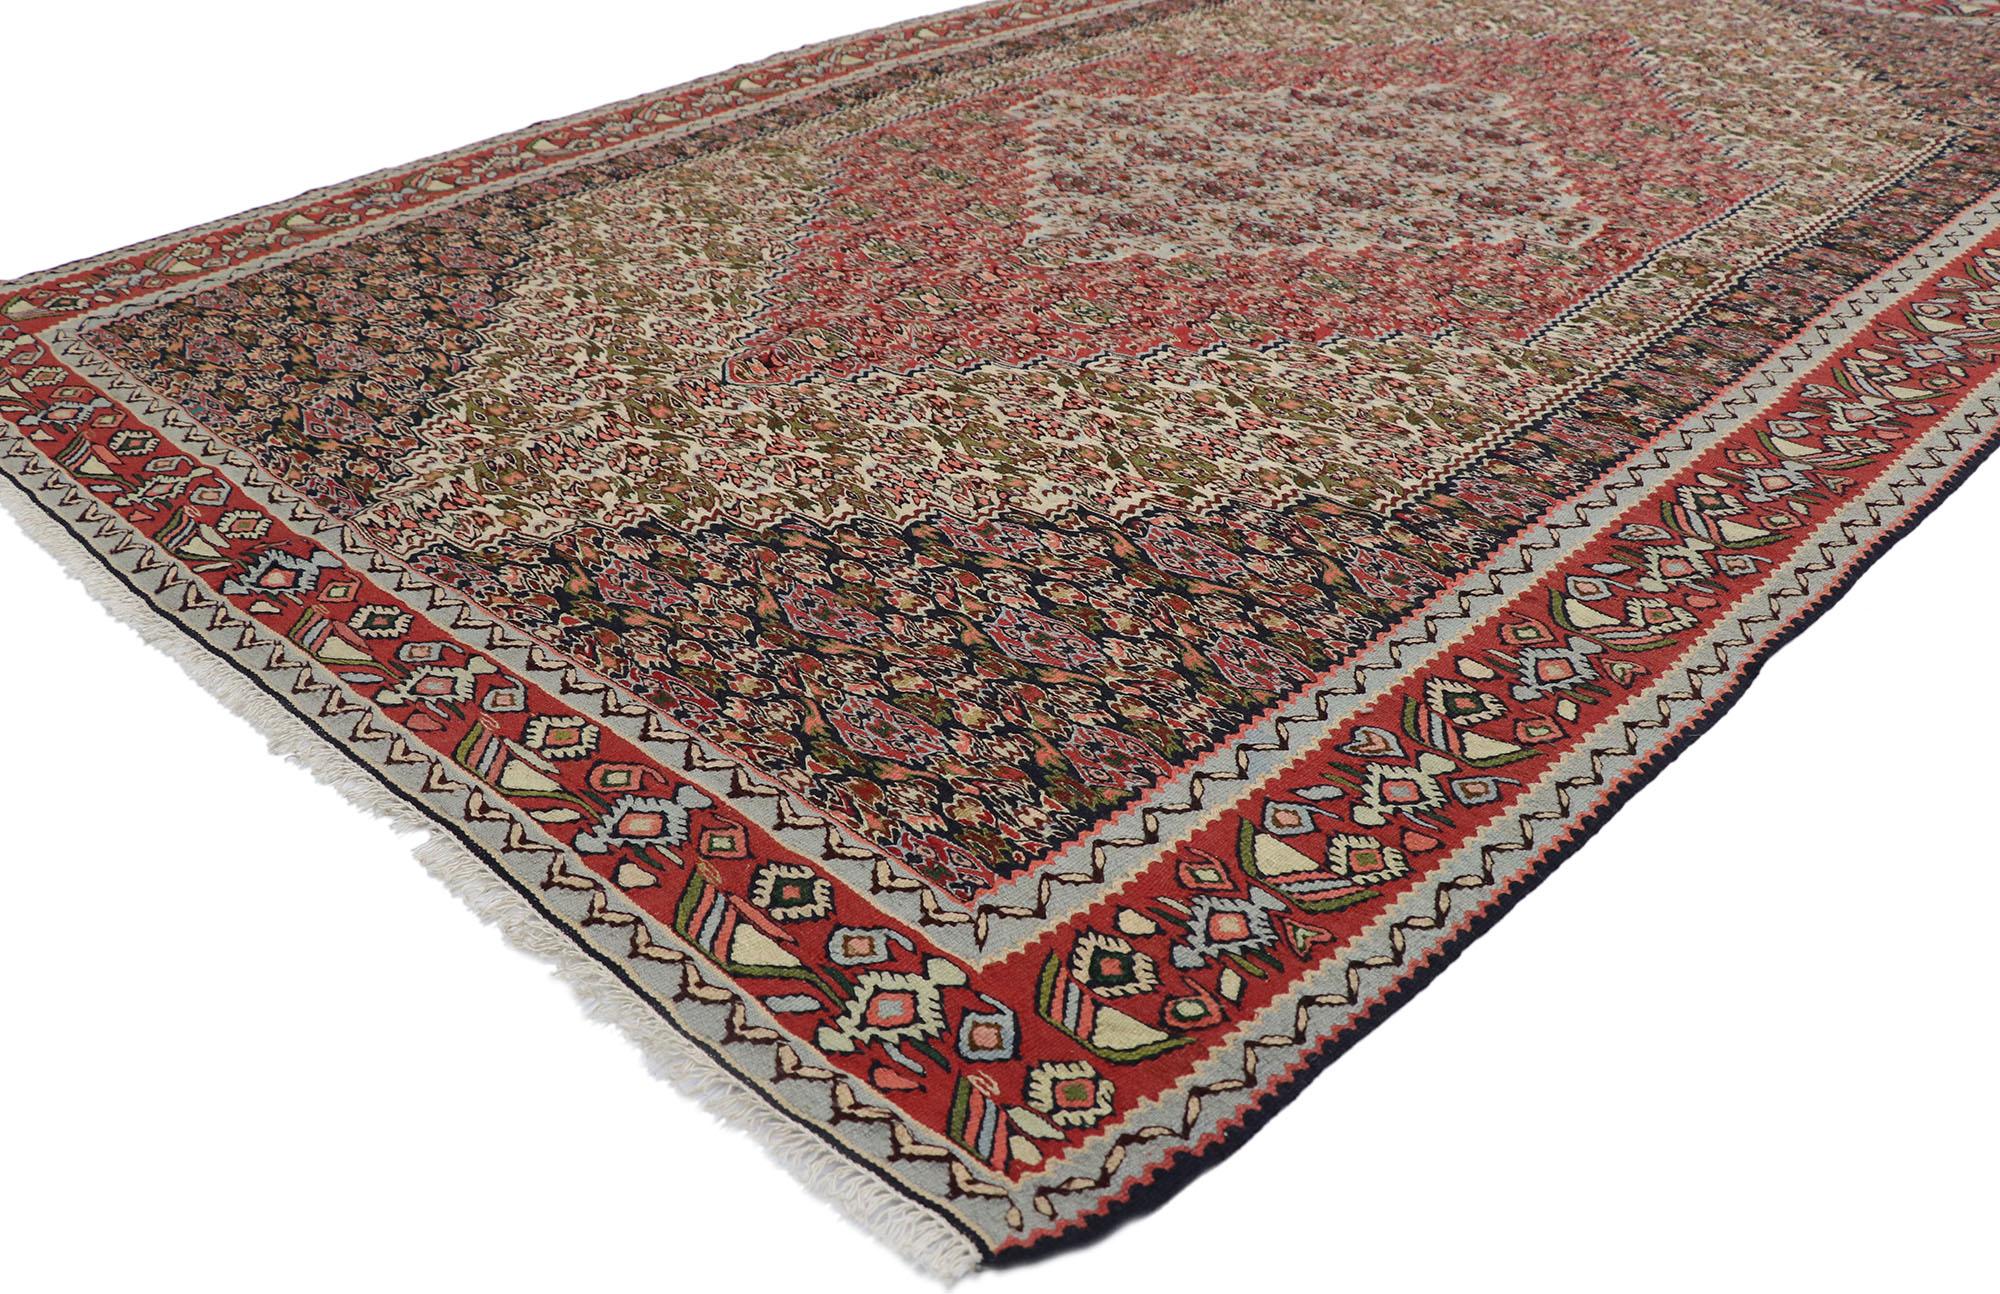 78043 vintage Persian Senneh Kilim rug with Farmhouse Cottage style 05'02 x 07'10. Effortless beauty and simplicity, this hand-woven wool vintage Persian Senneh kilim rug gives a lively and light hearted feel with its bucolic charm. The abrashed